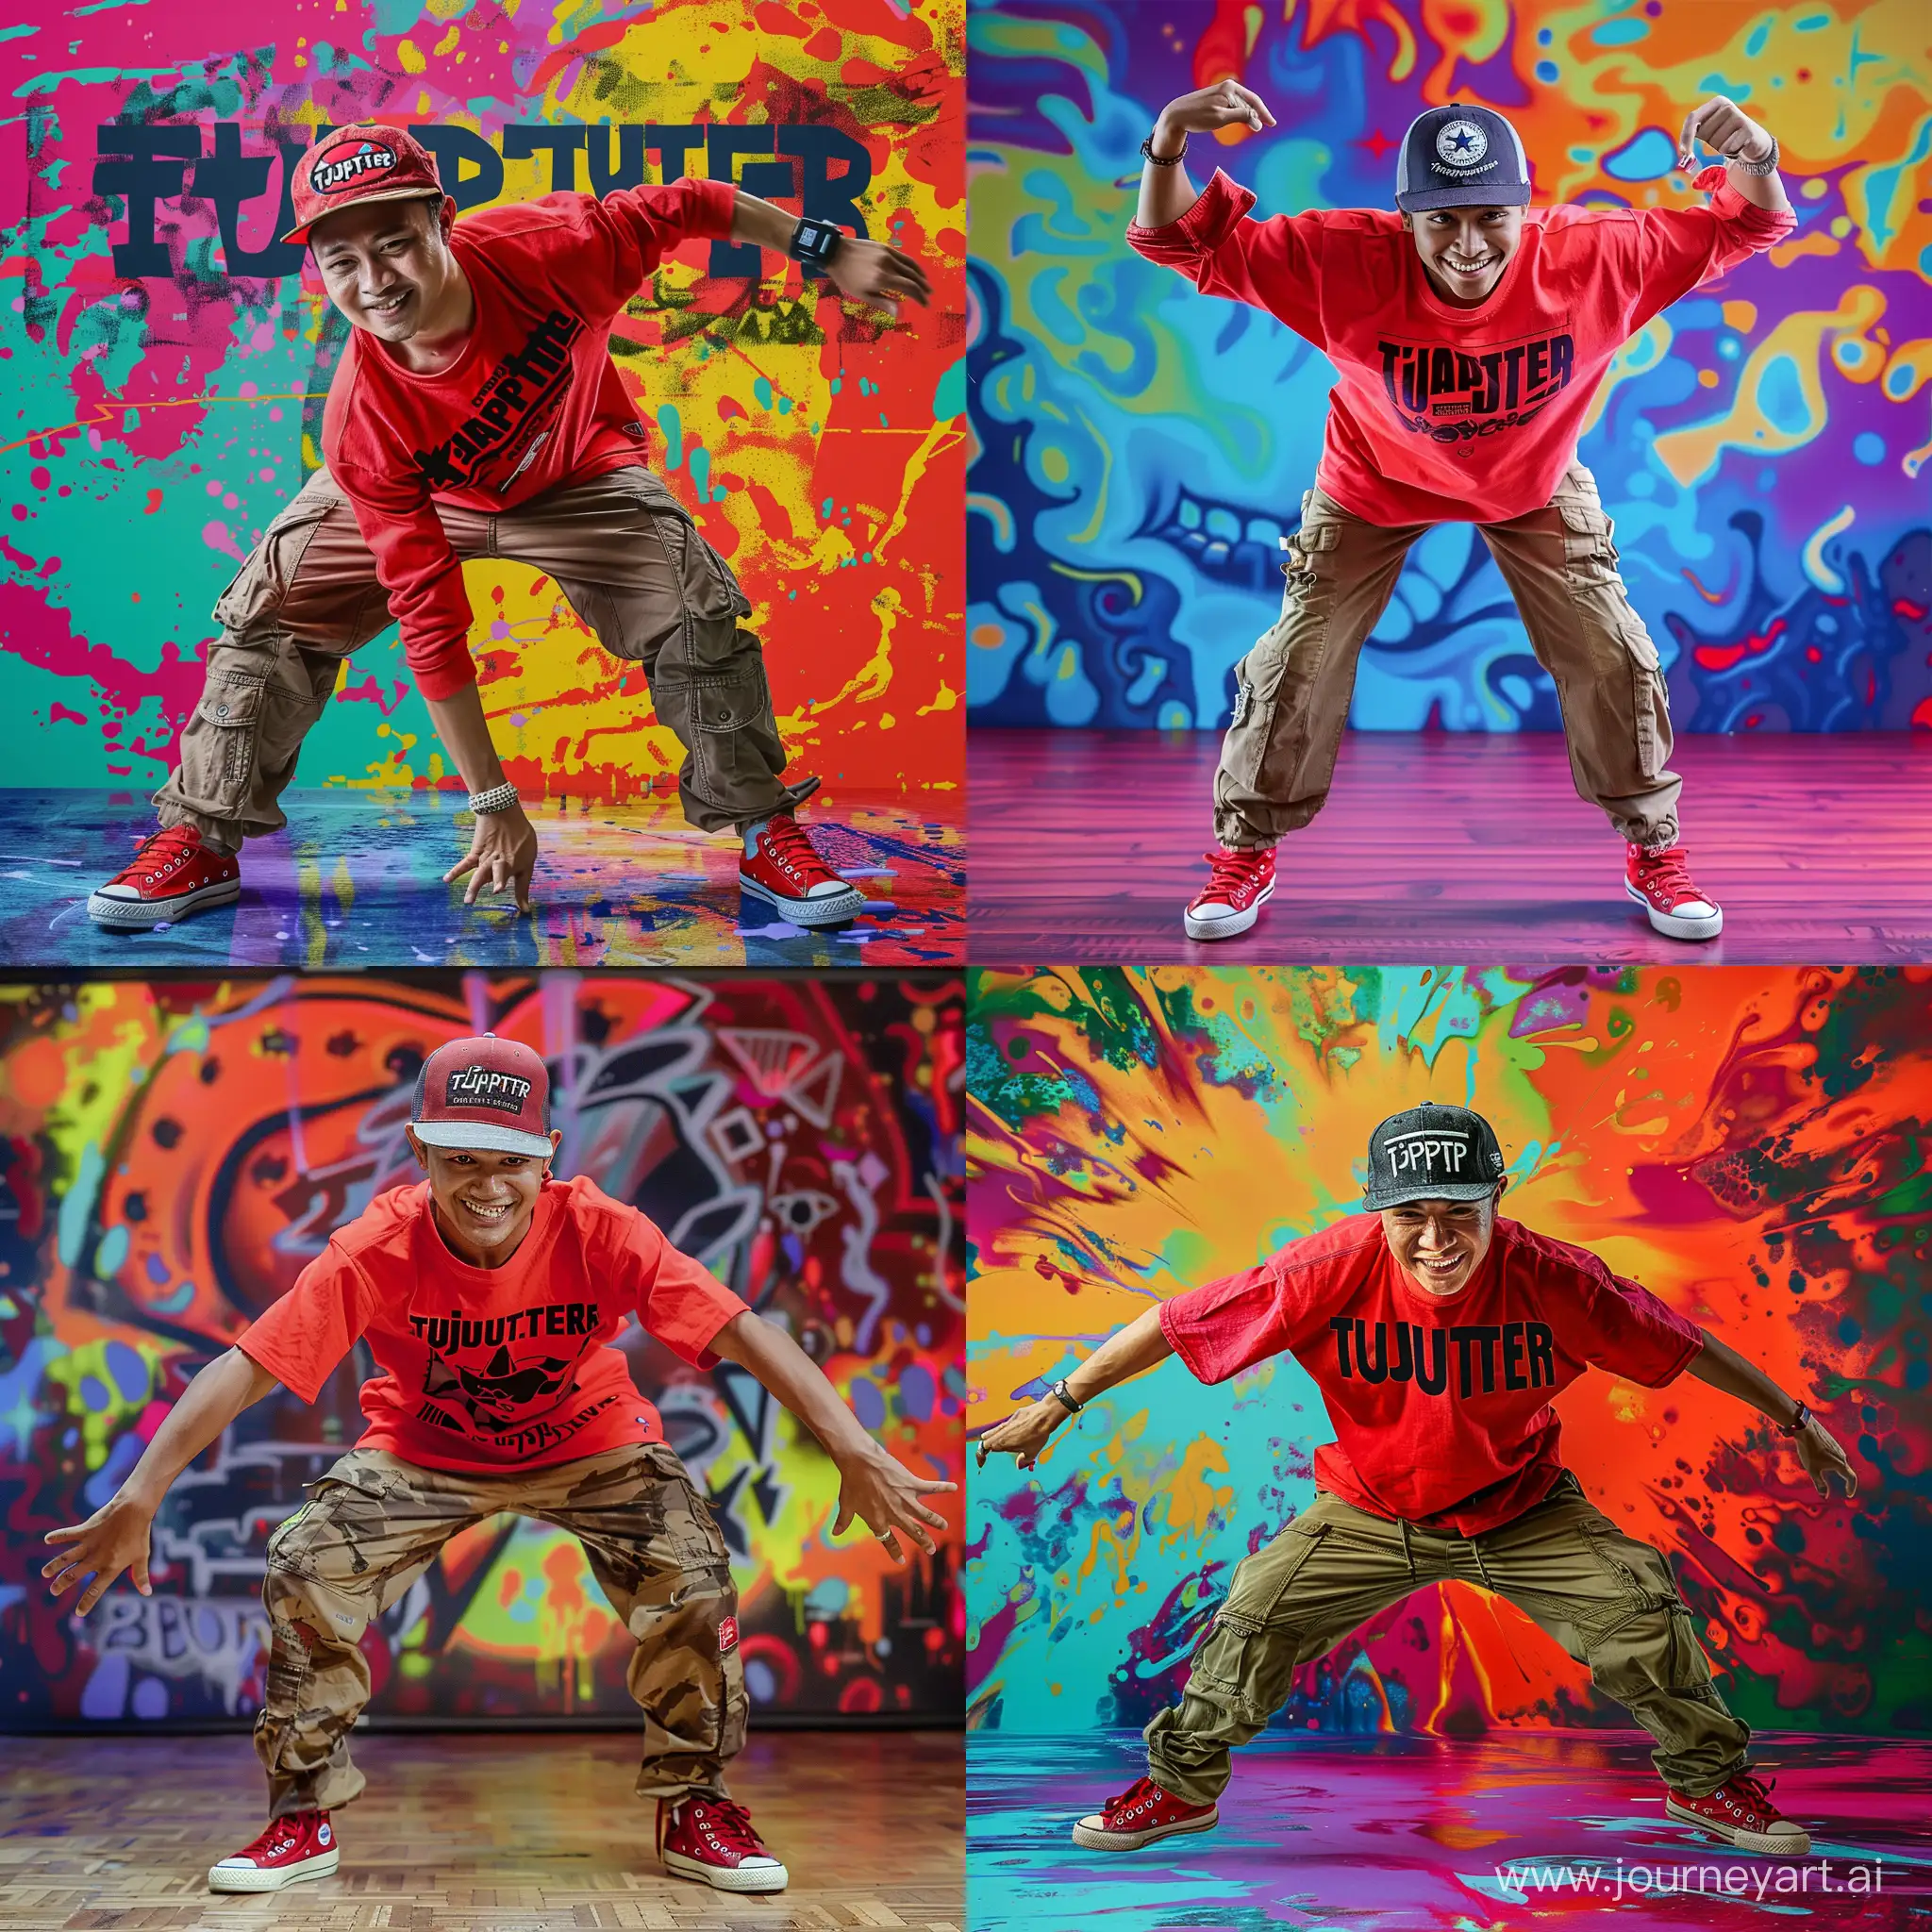 A handsome Indonesian young man is realistically breakdancing, smiling facing forward, wearing a snapback cap with the inscription 'tjaptjuter', a slightly wide red shirt with the inscription 'tjaptjuter' in black, long cargo pants above the ankles, red Converse shoes, doing a breakdance handstand move, with a colorful background. 